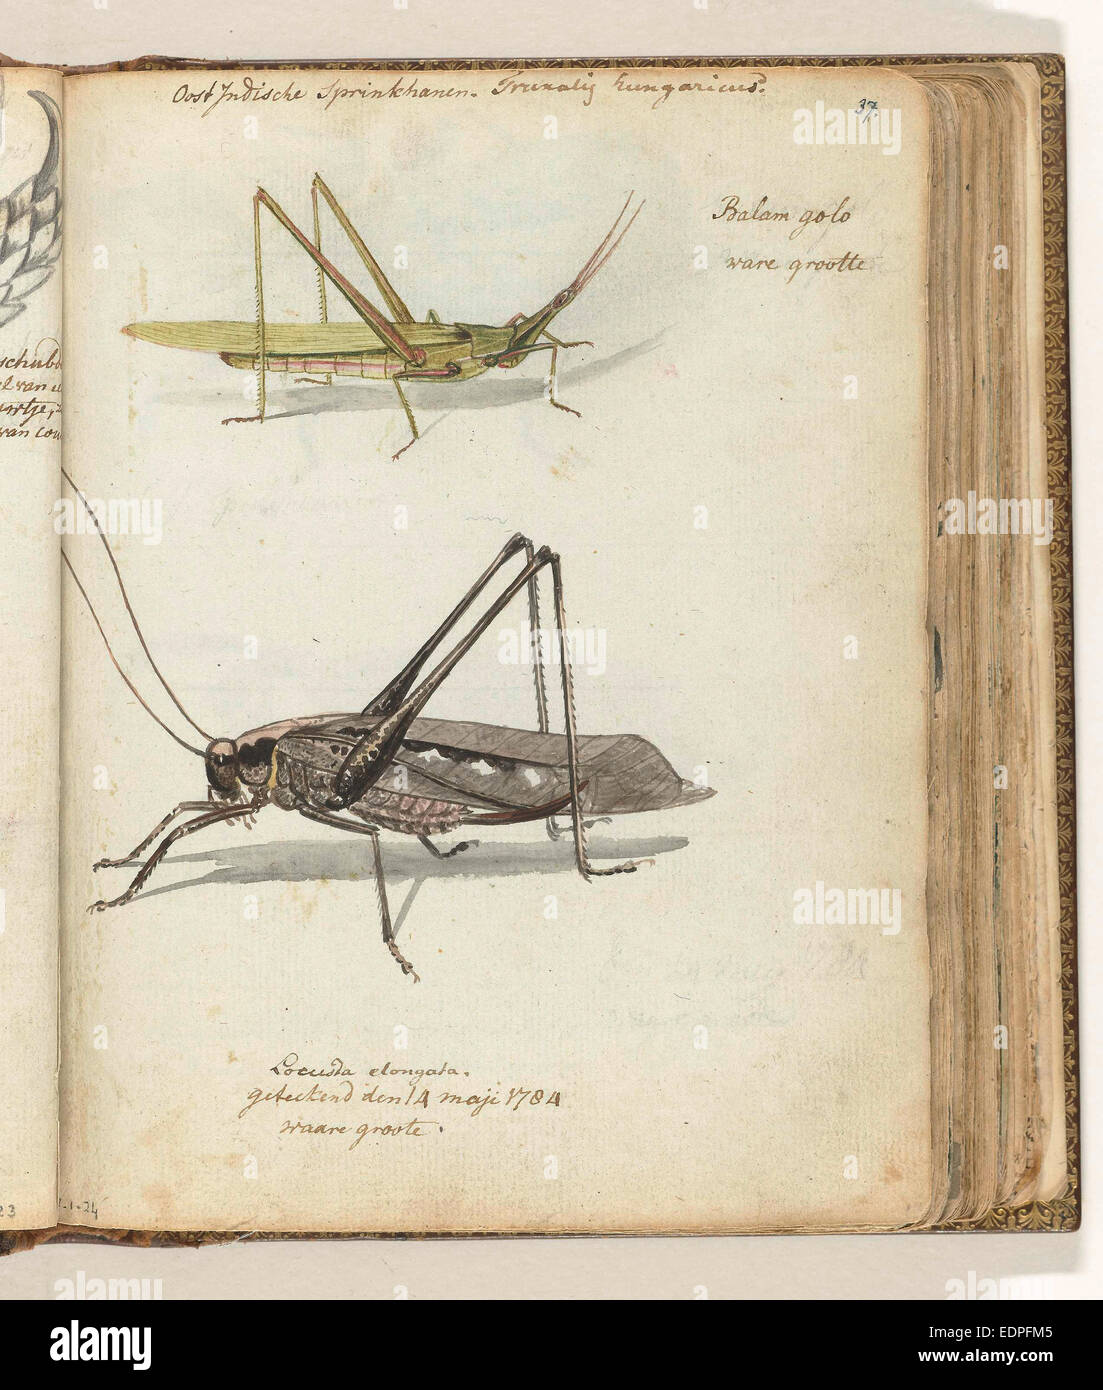 Insects, Jan Brandes, 1784 Stock Photo